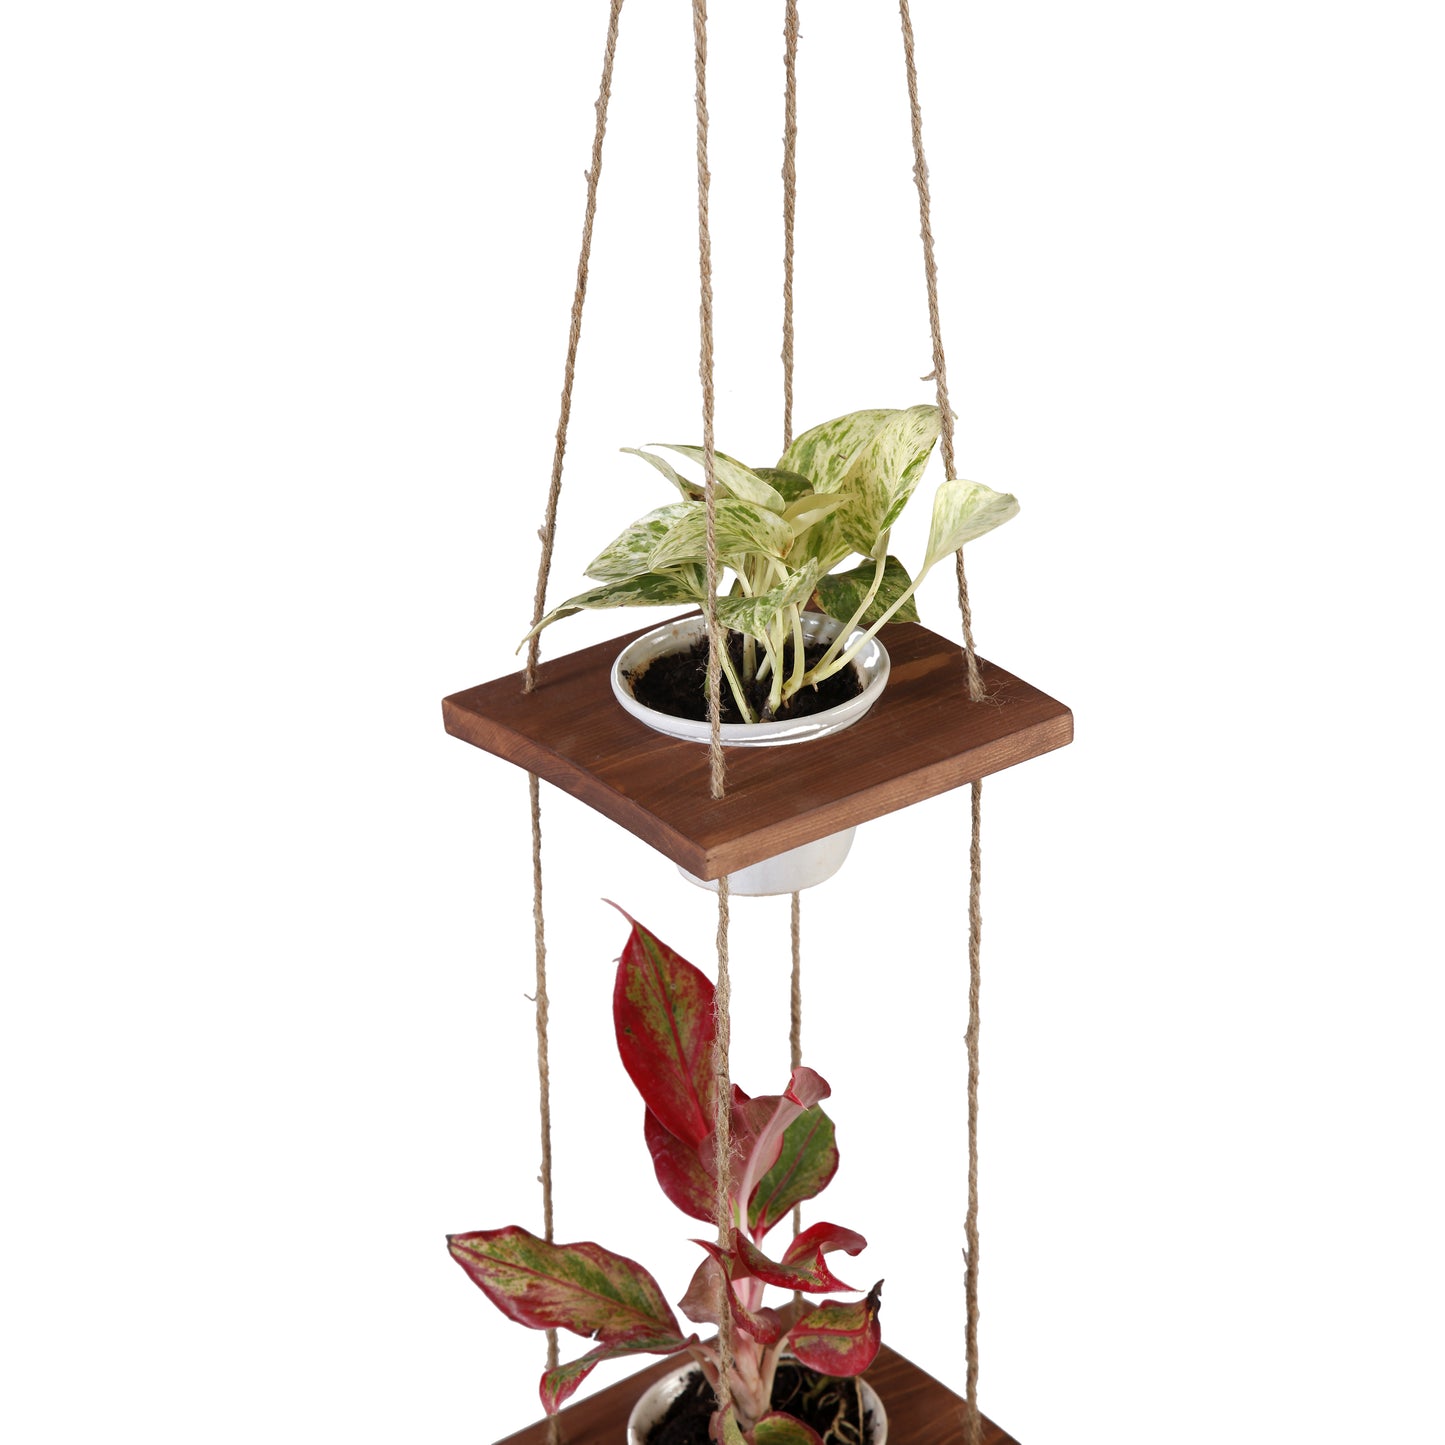 A Tiny Mistake Hanging Pinewood and Ceramic Planter Vertical, Indoor Planter for Home Decor, Wooden Planter with Three Pots (Dark)